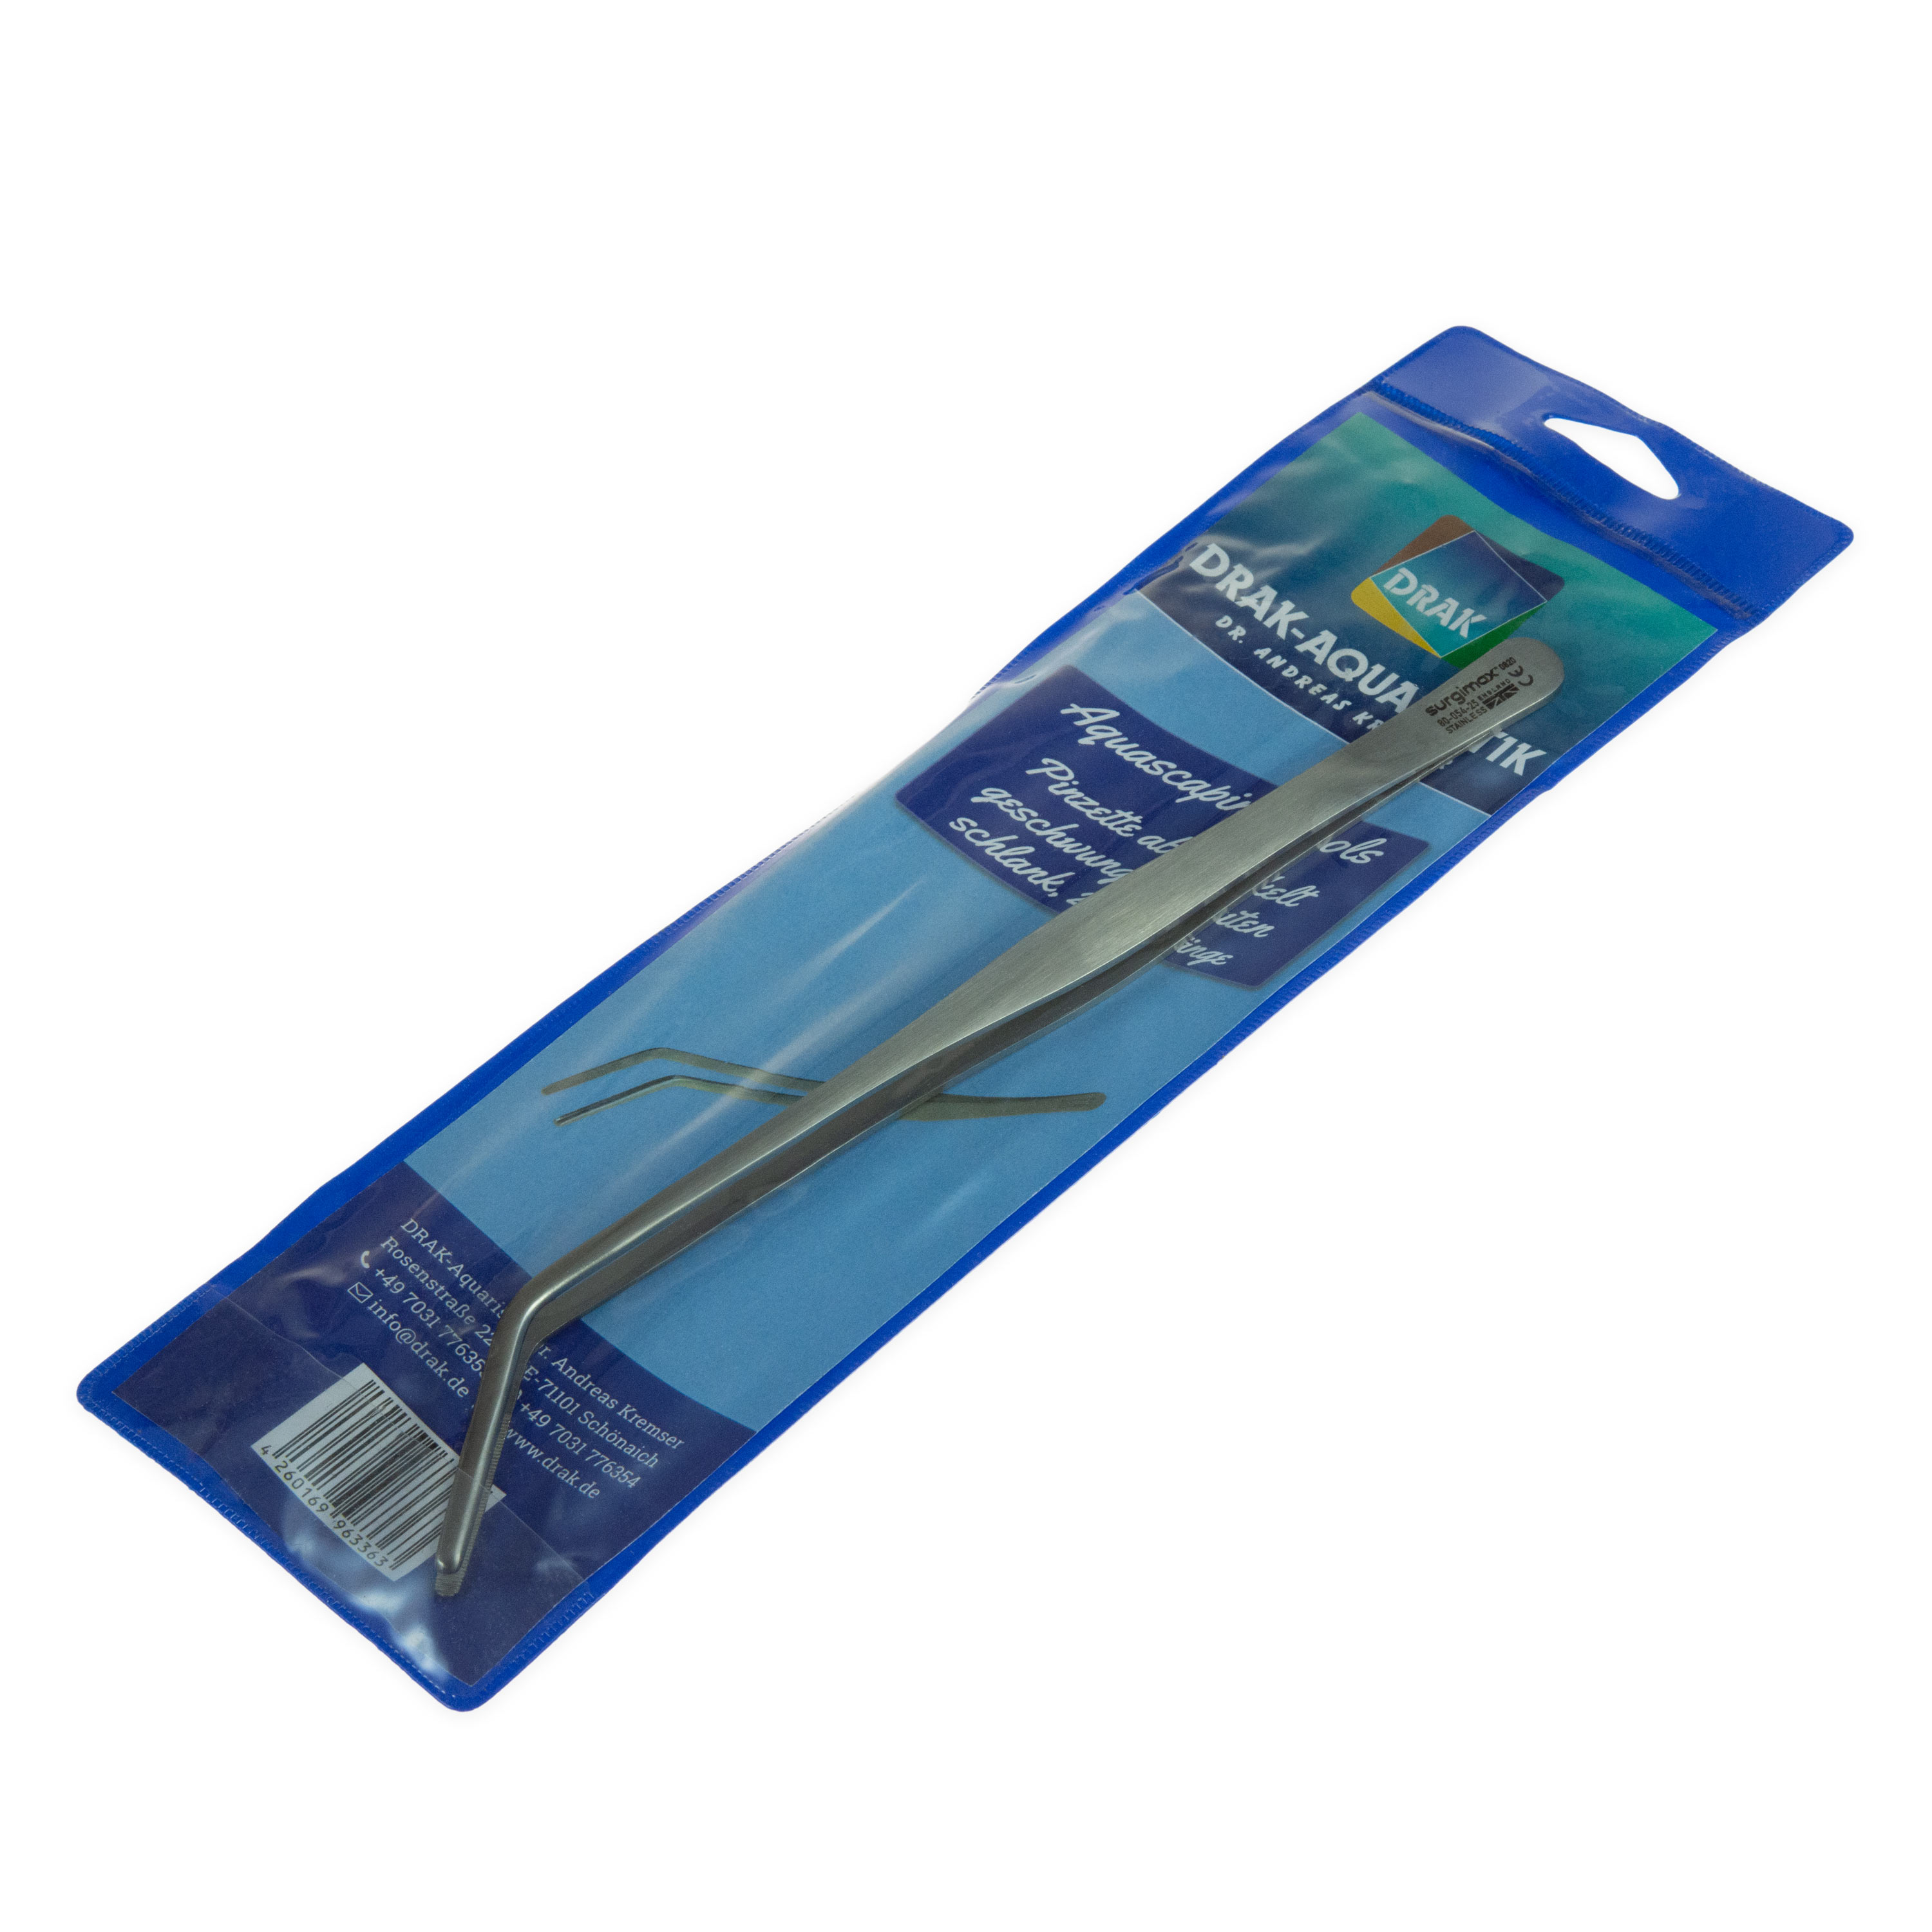 Tweezers 25 cm, slim with curved sides, angled, blue bag